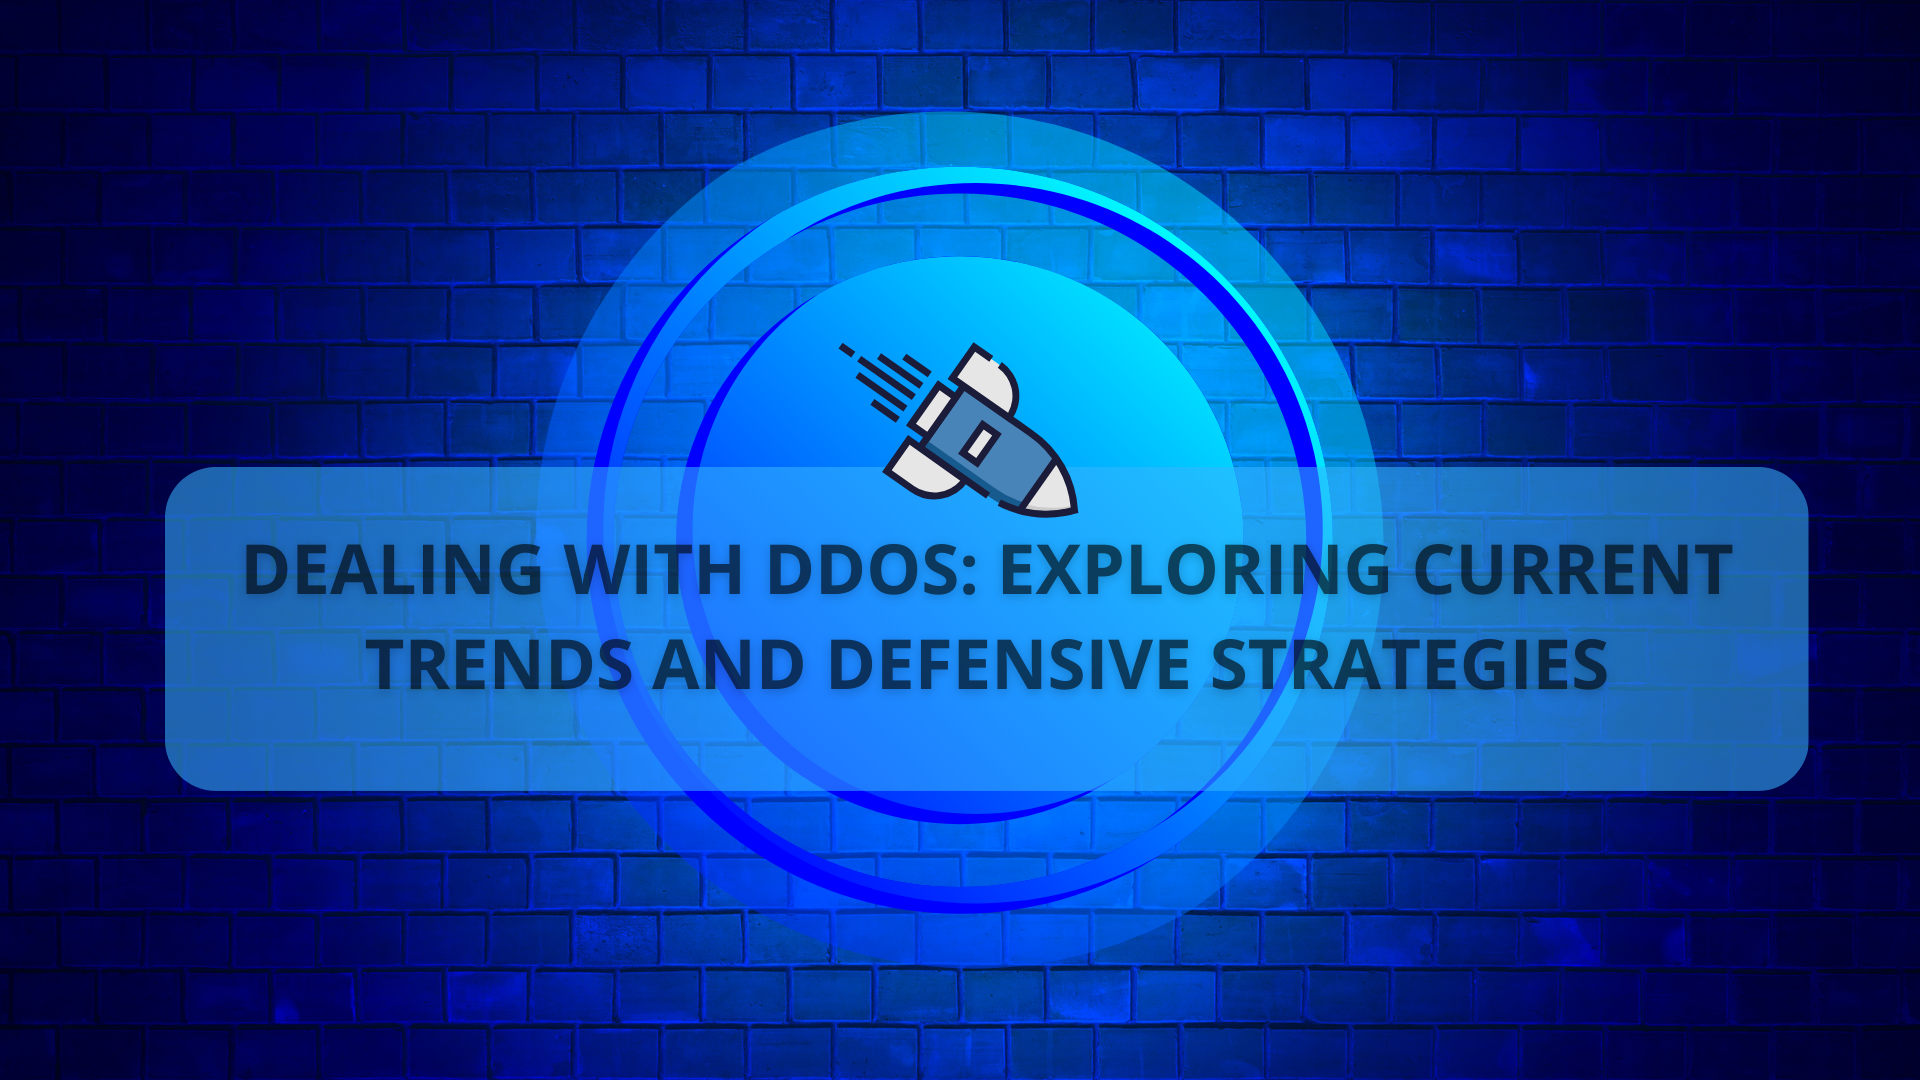 Dealing with DDoS Exploring Current Trends and Defensive Strategies